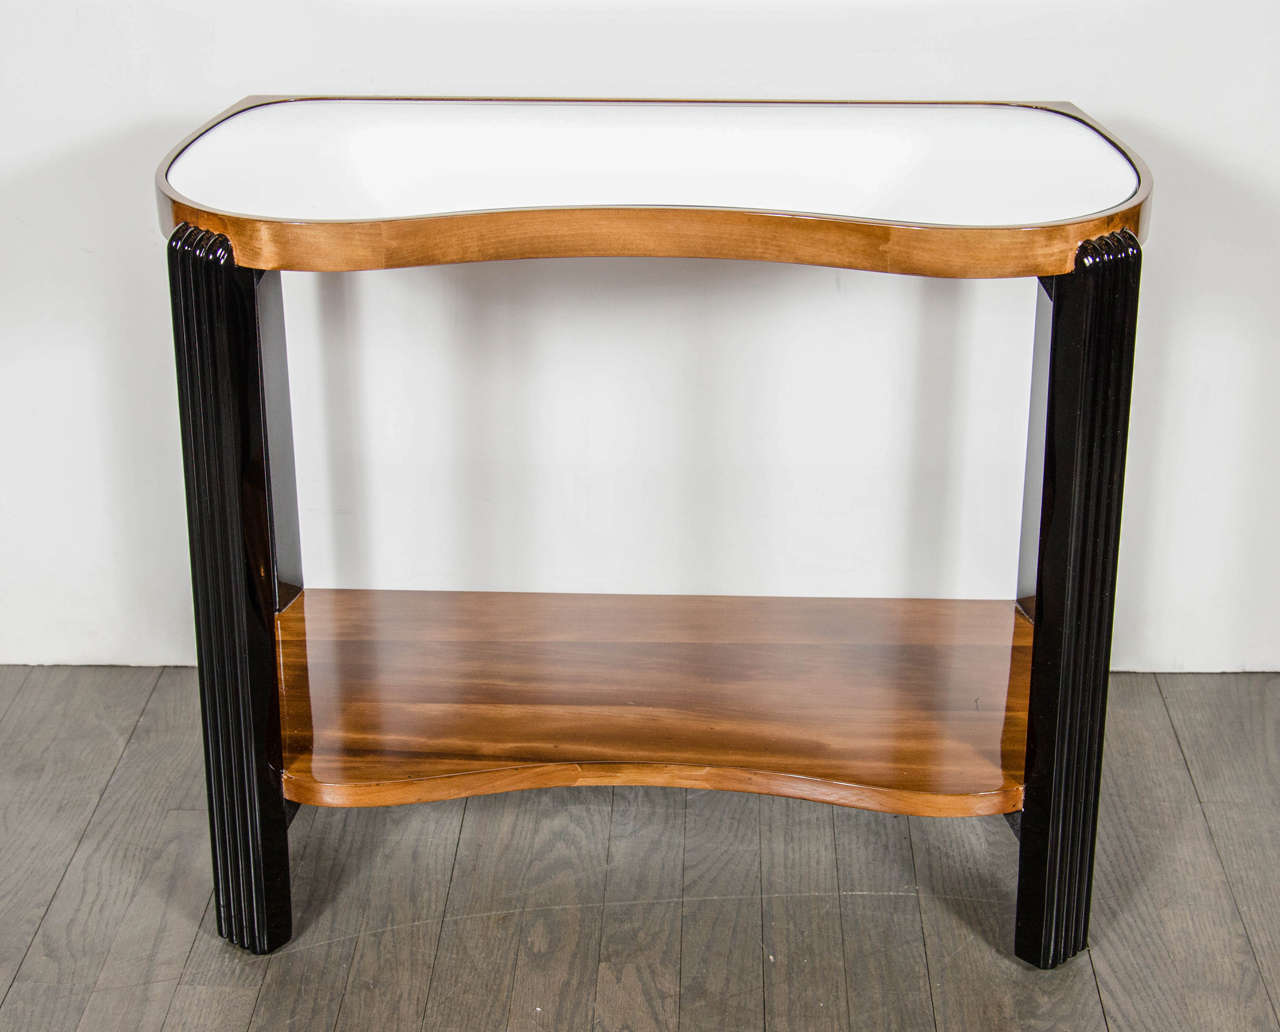 American Art Deco Machine Age Side Table with Streamline Reeded Leg Design For Sale